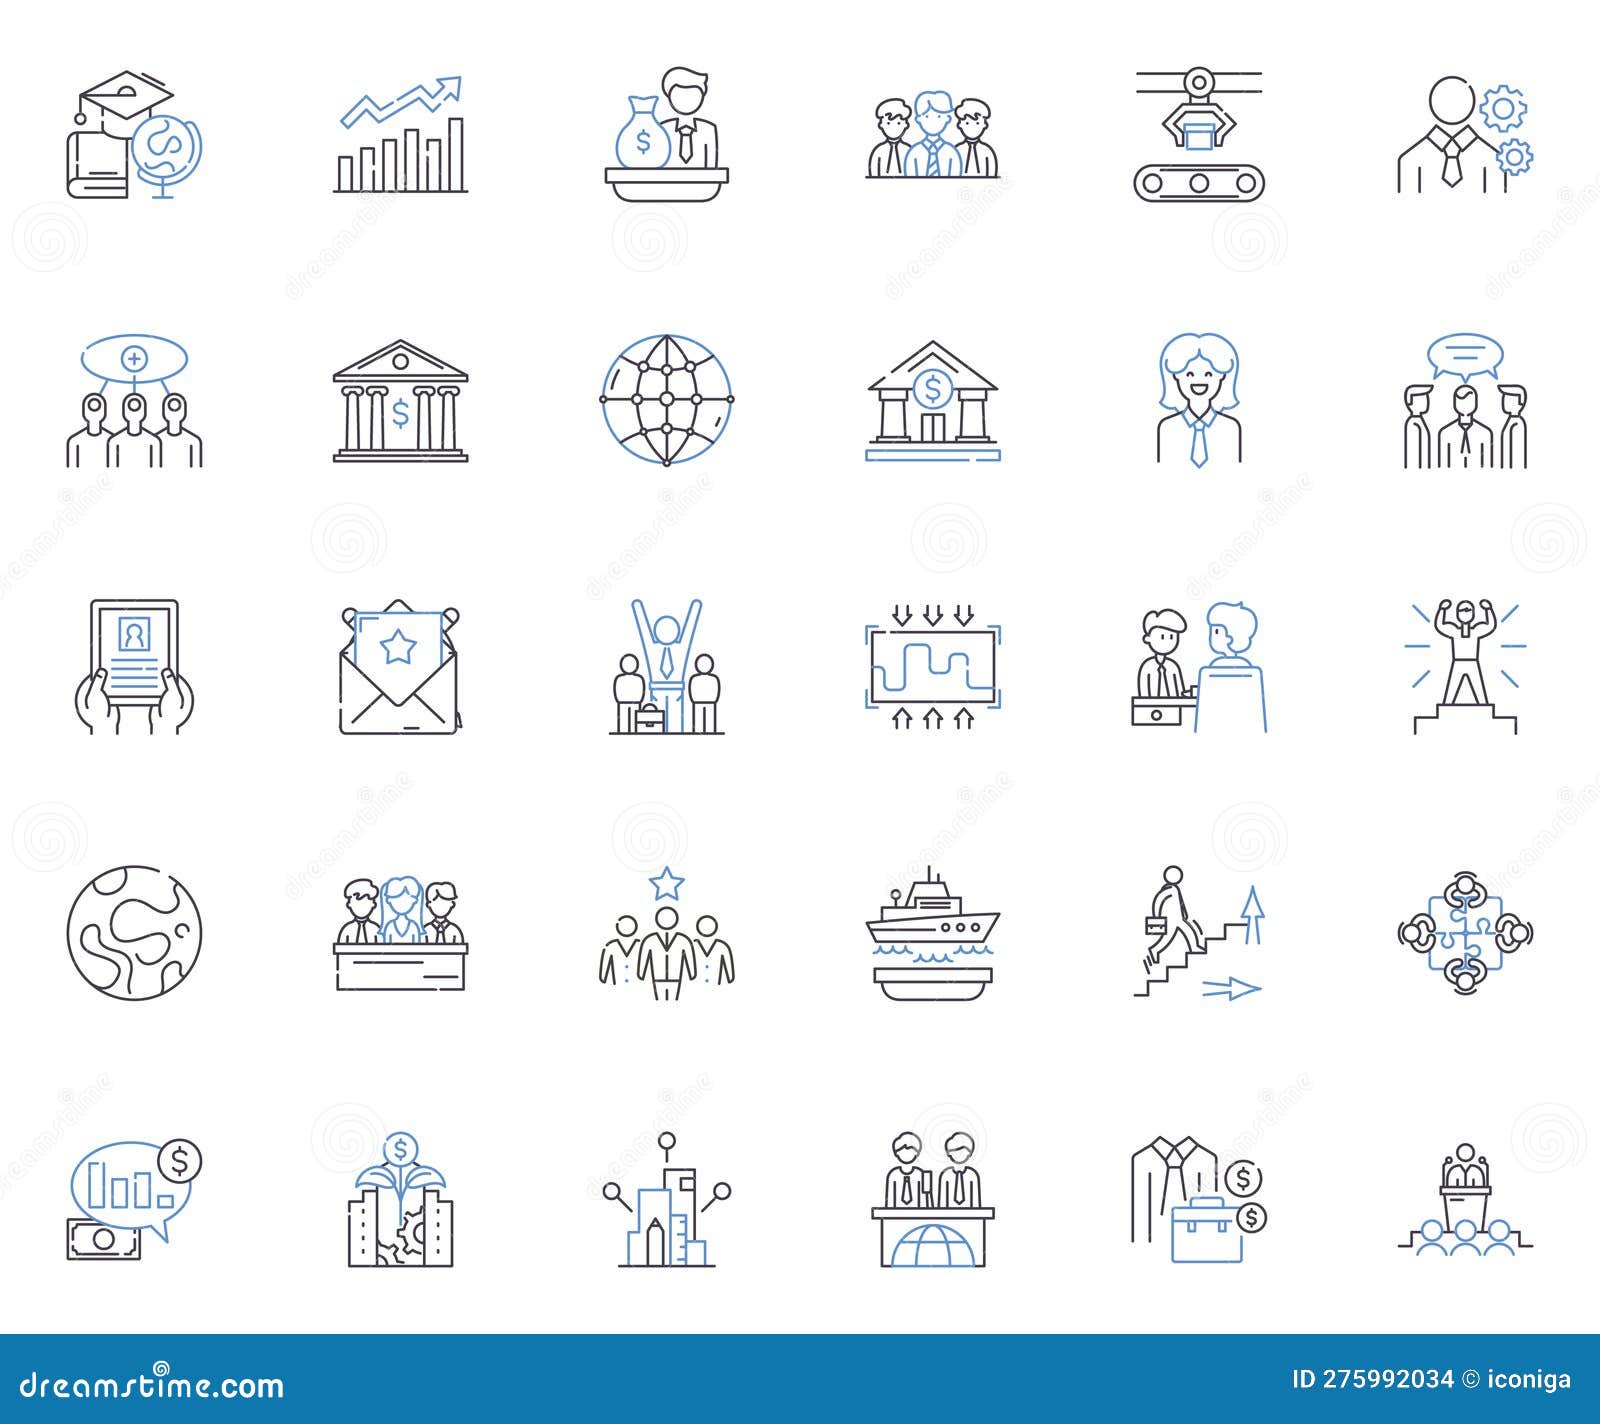 advanced expertise line icons collection. mastery, proficiency, expertness, adeptness, skillfulness, finesse, polished